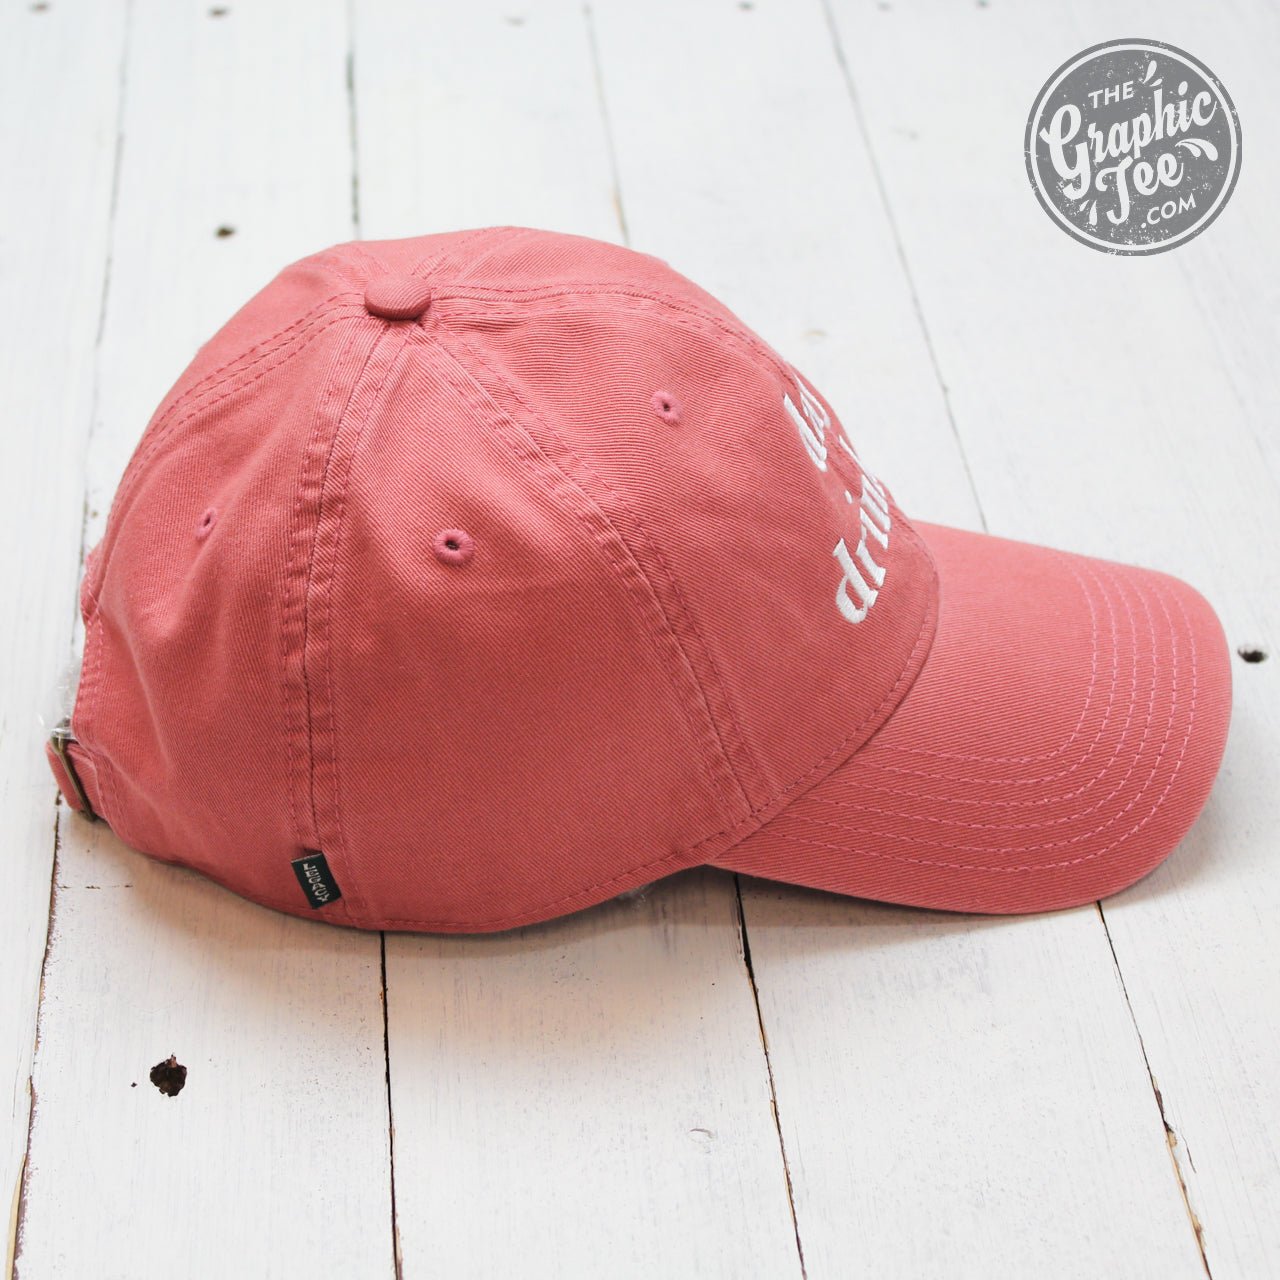 Day Drinker - Nantucket Red Relaxed Twill Dad Hat - The Graphic Tee